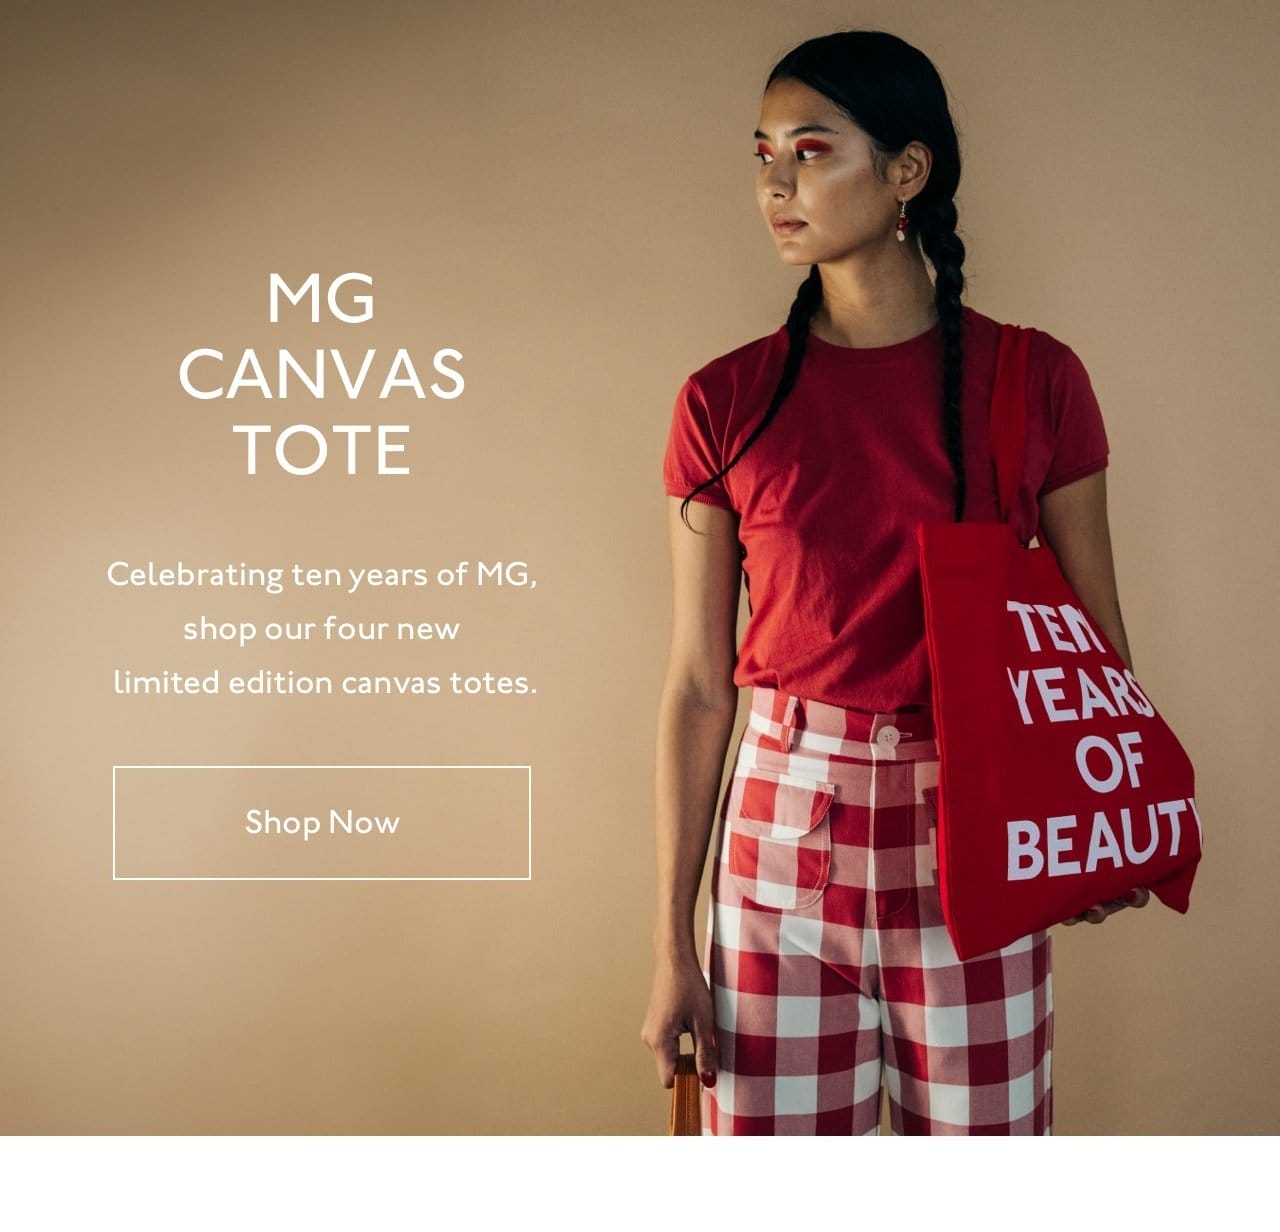 Celebrating ten years of MG, shop our four new limited edition canvas totes.